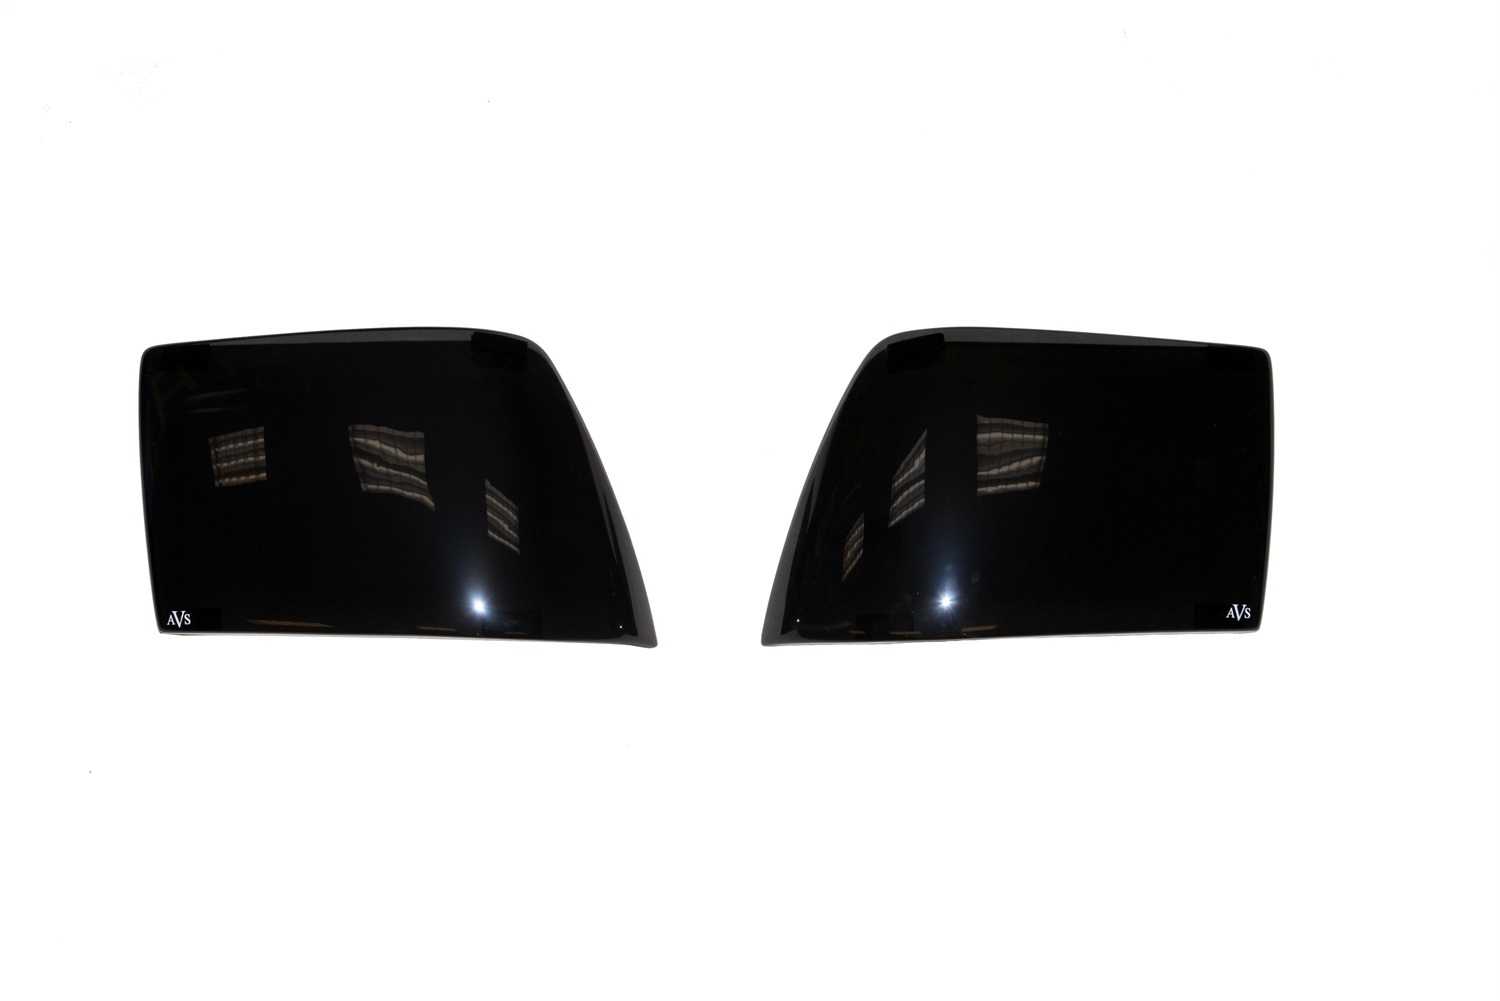 Auto Ventshade Auto Ventshade 33013 Tail Shades; Taillight Covers Fits 99-04 Mustang